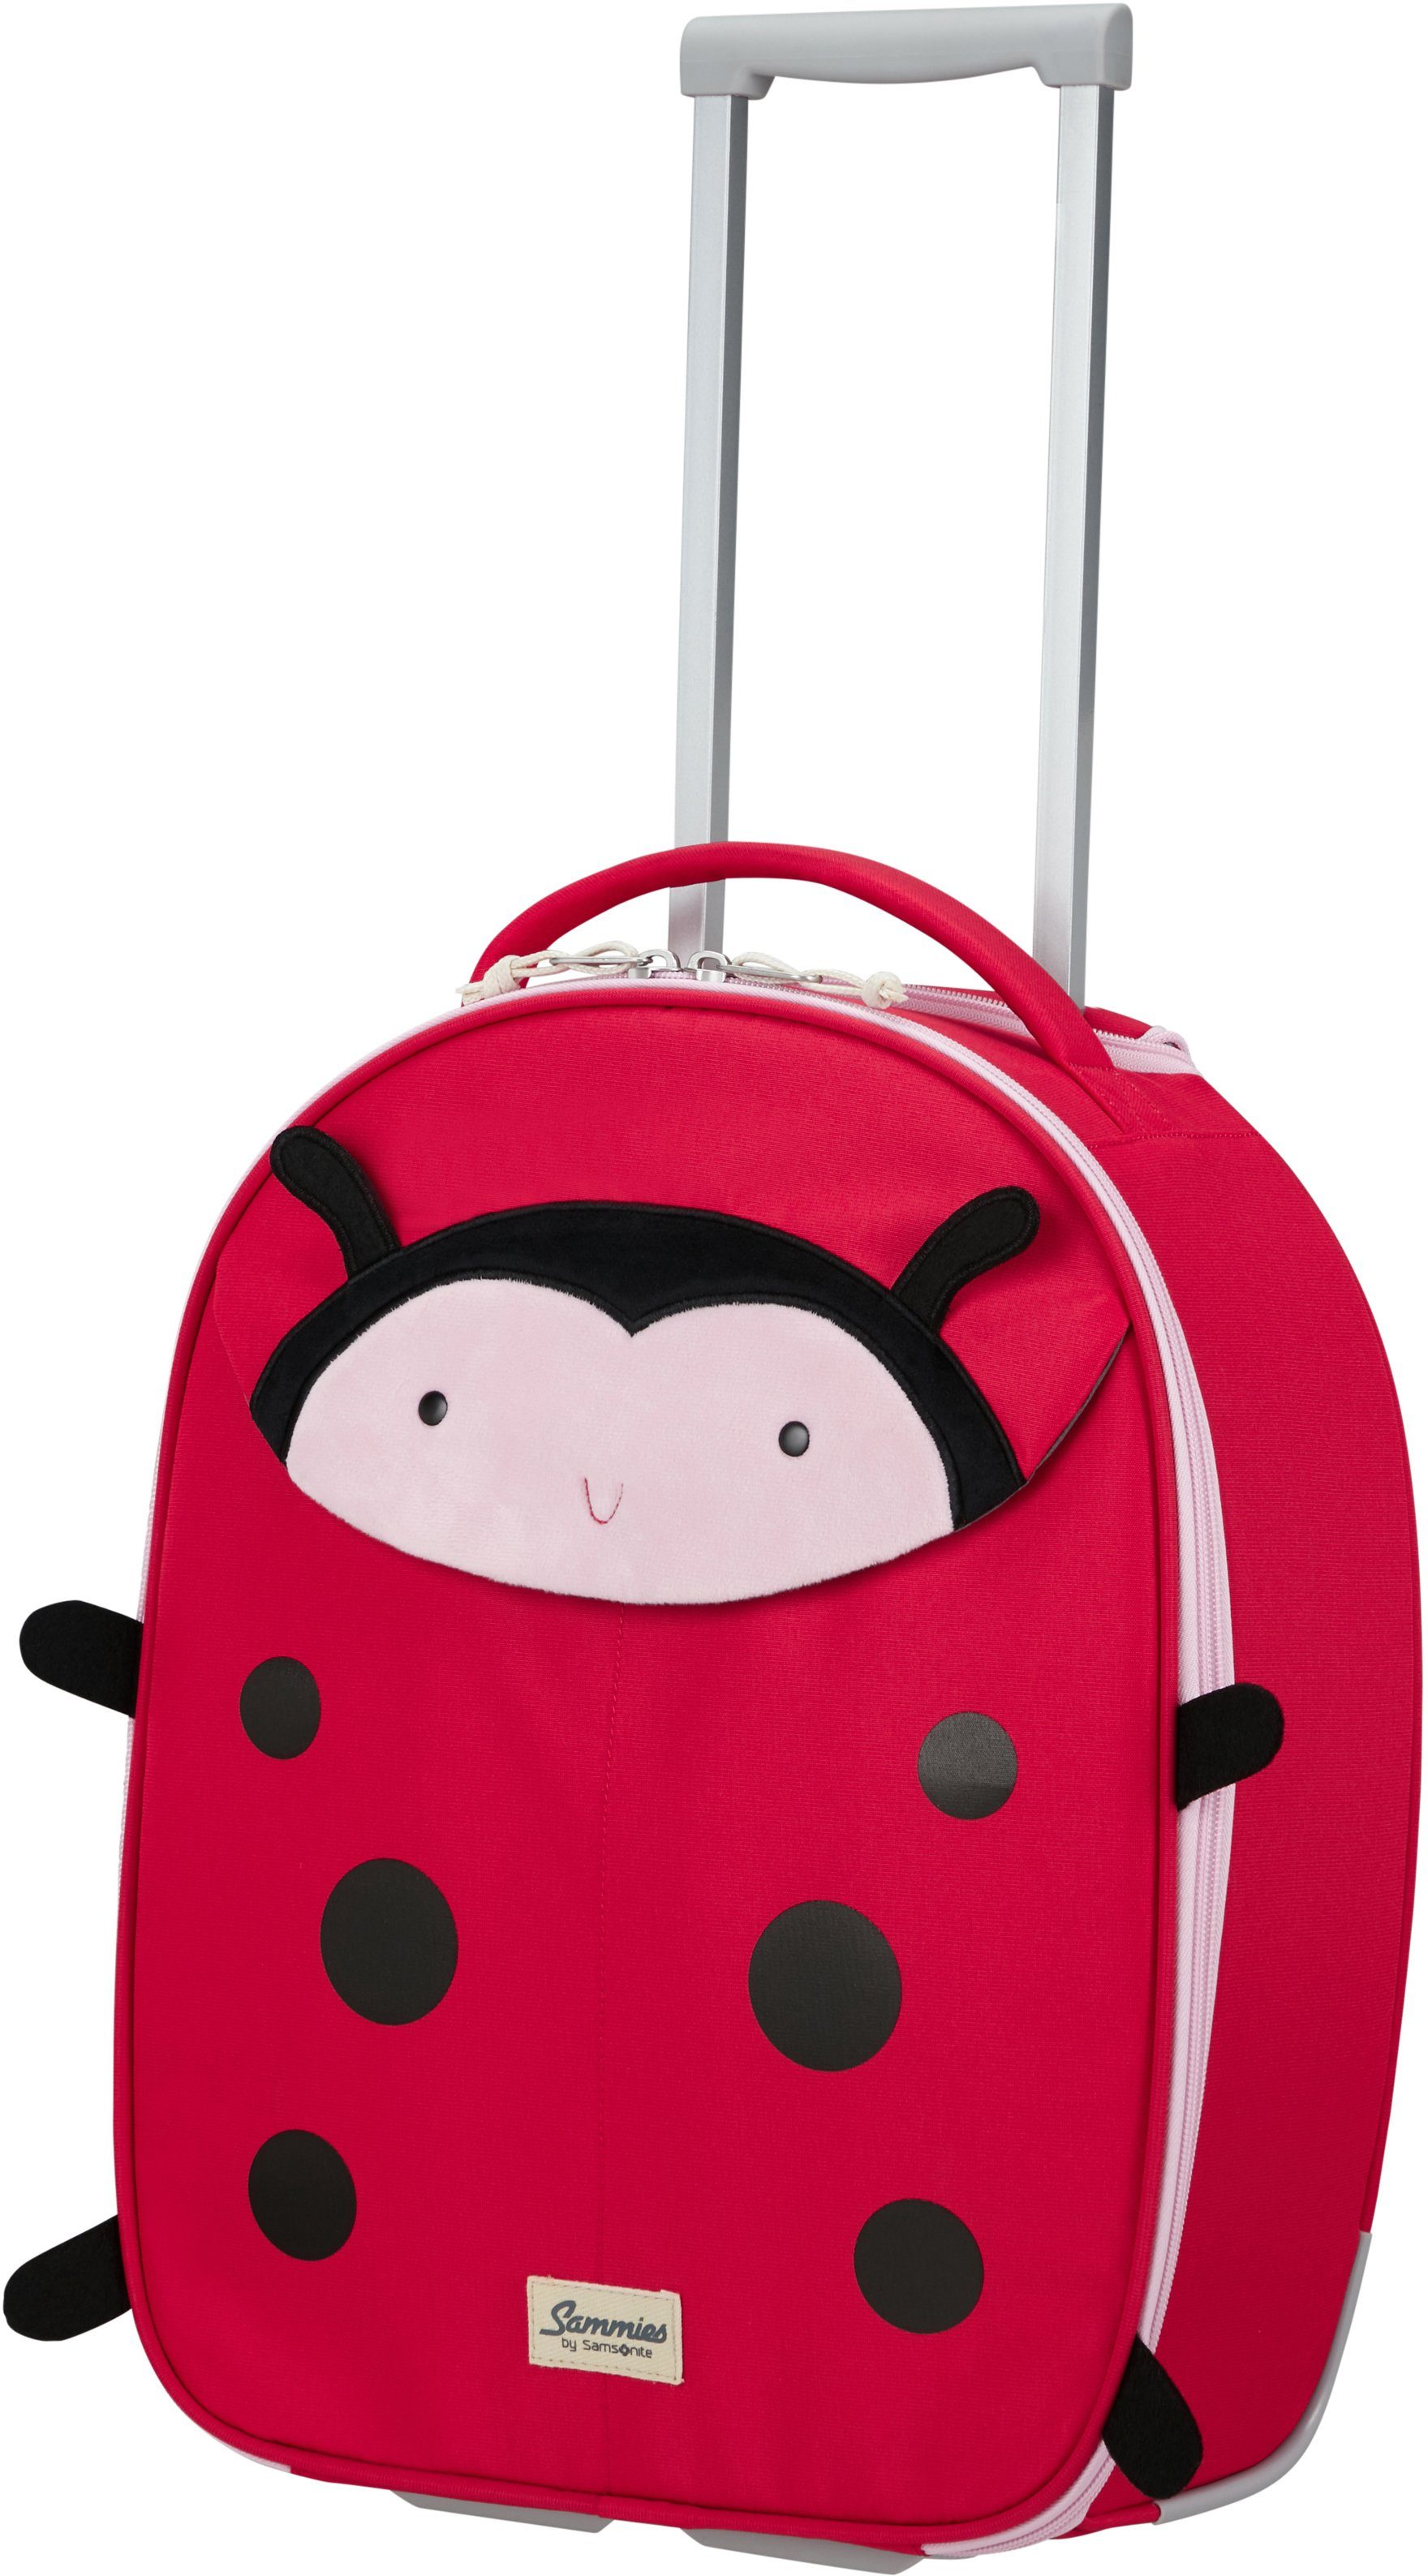 Happy 2 Sammies Lally, Material ECO, aus Ladybug recyceltem Samsonite Rollen, Kinderkoffer